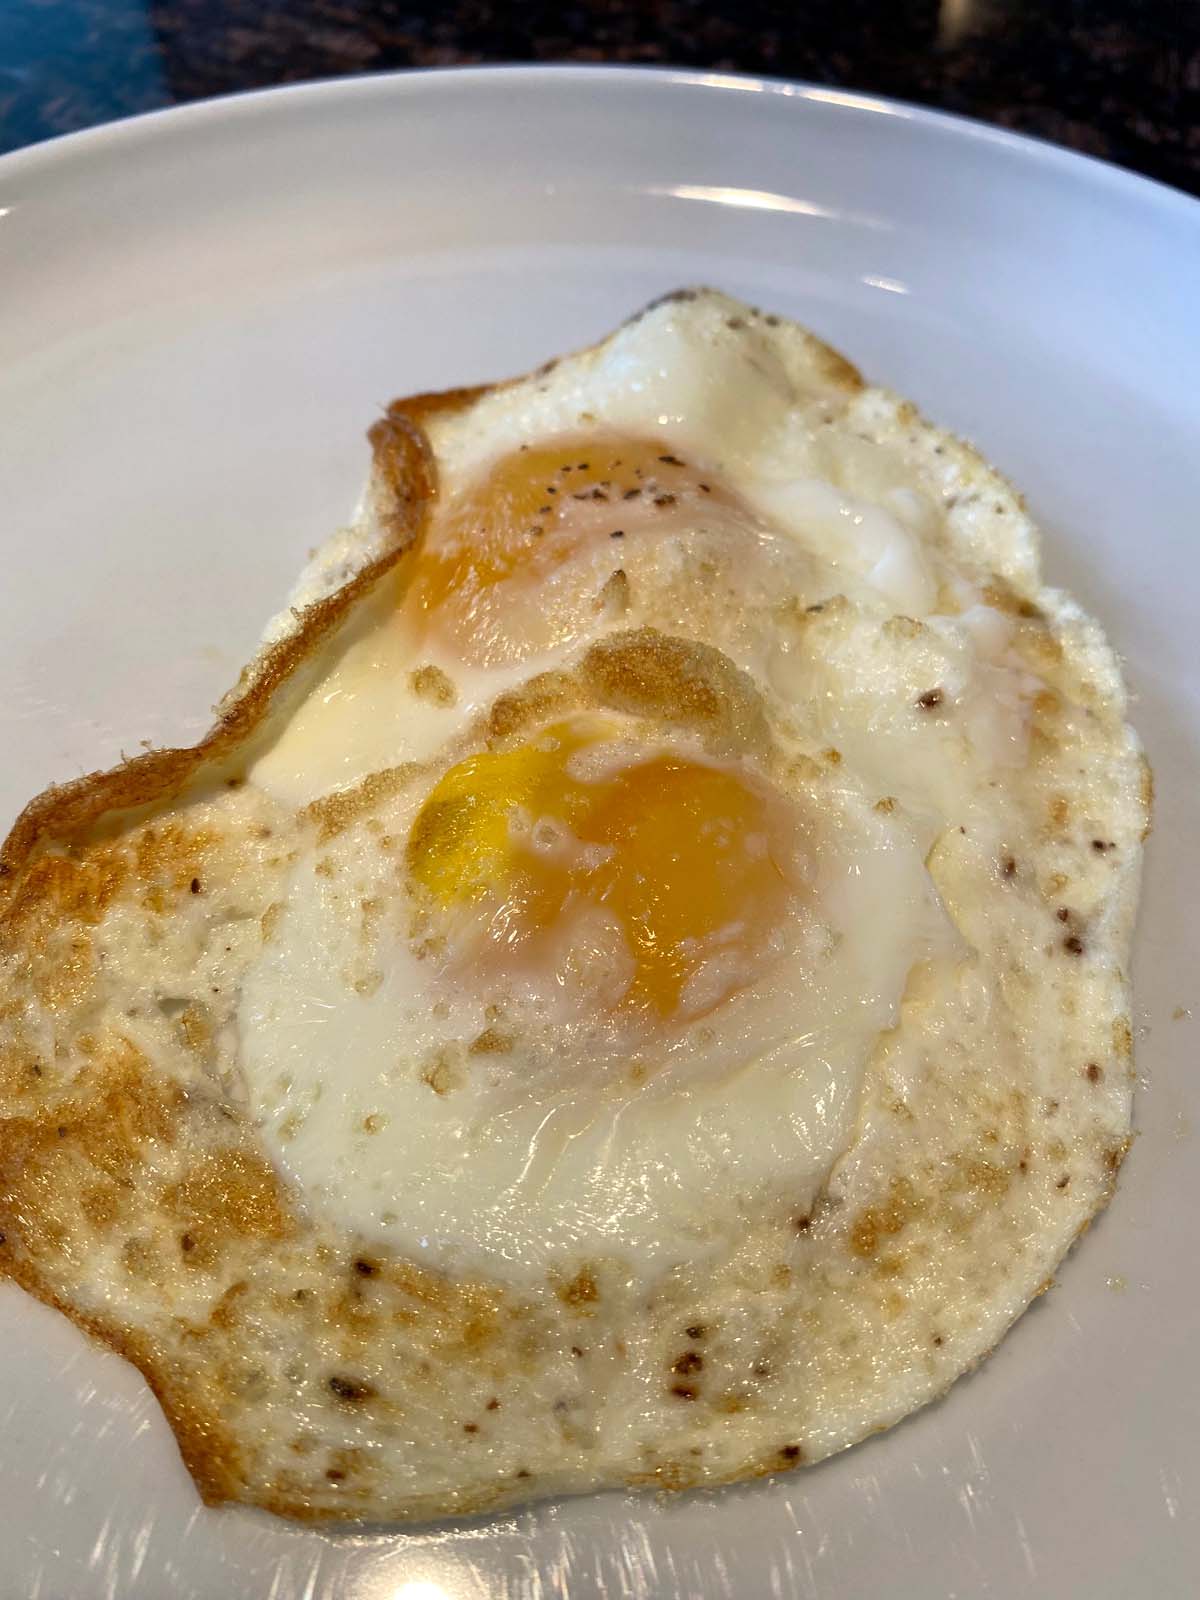 Cooked sunny side up eggs on a plate.